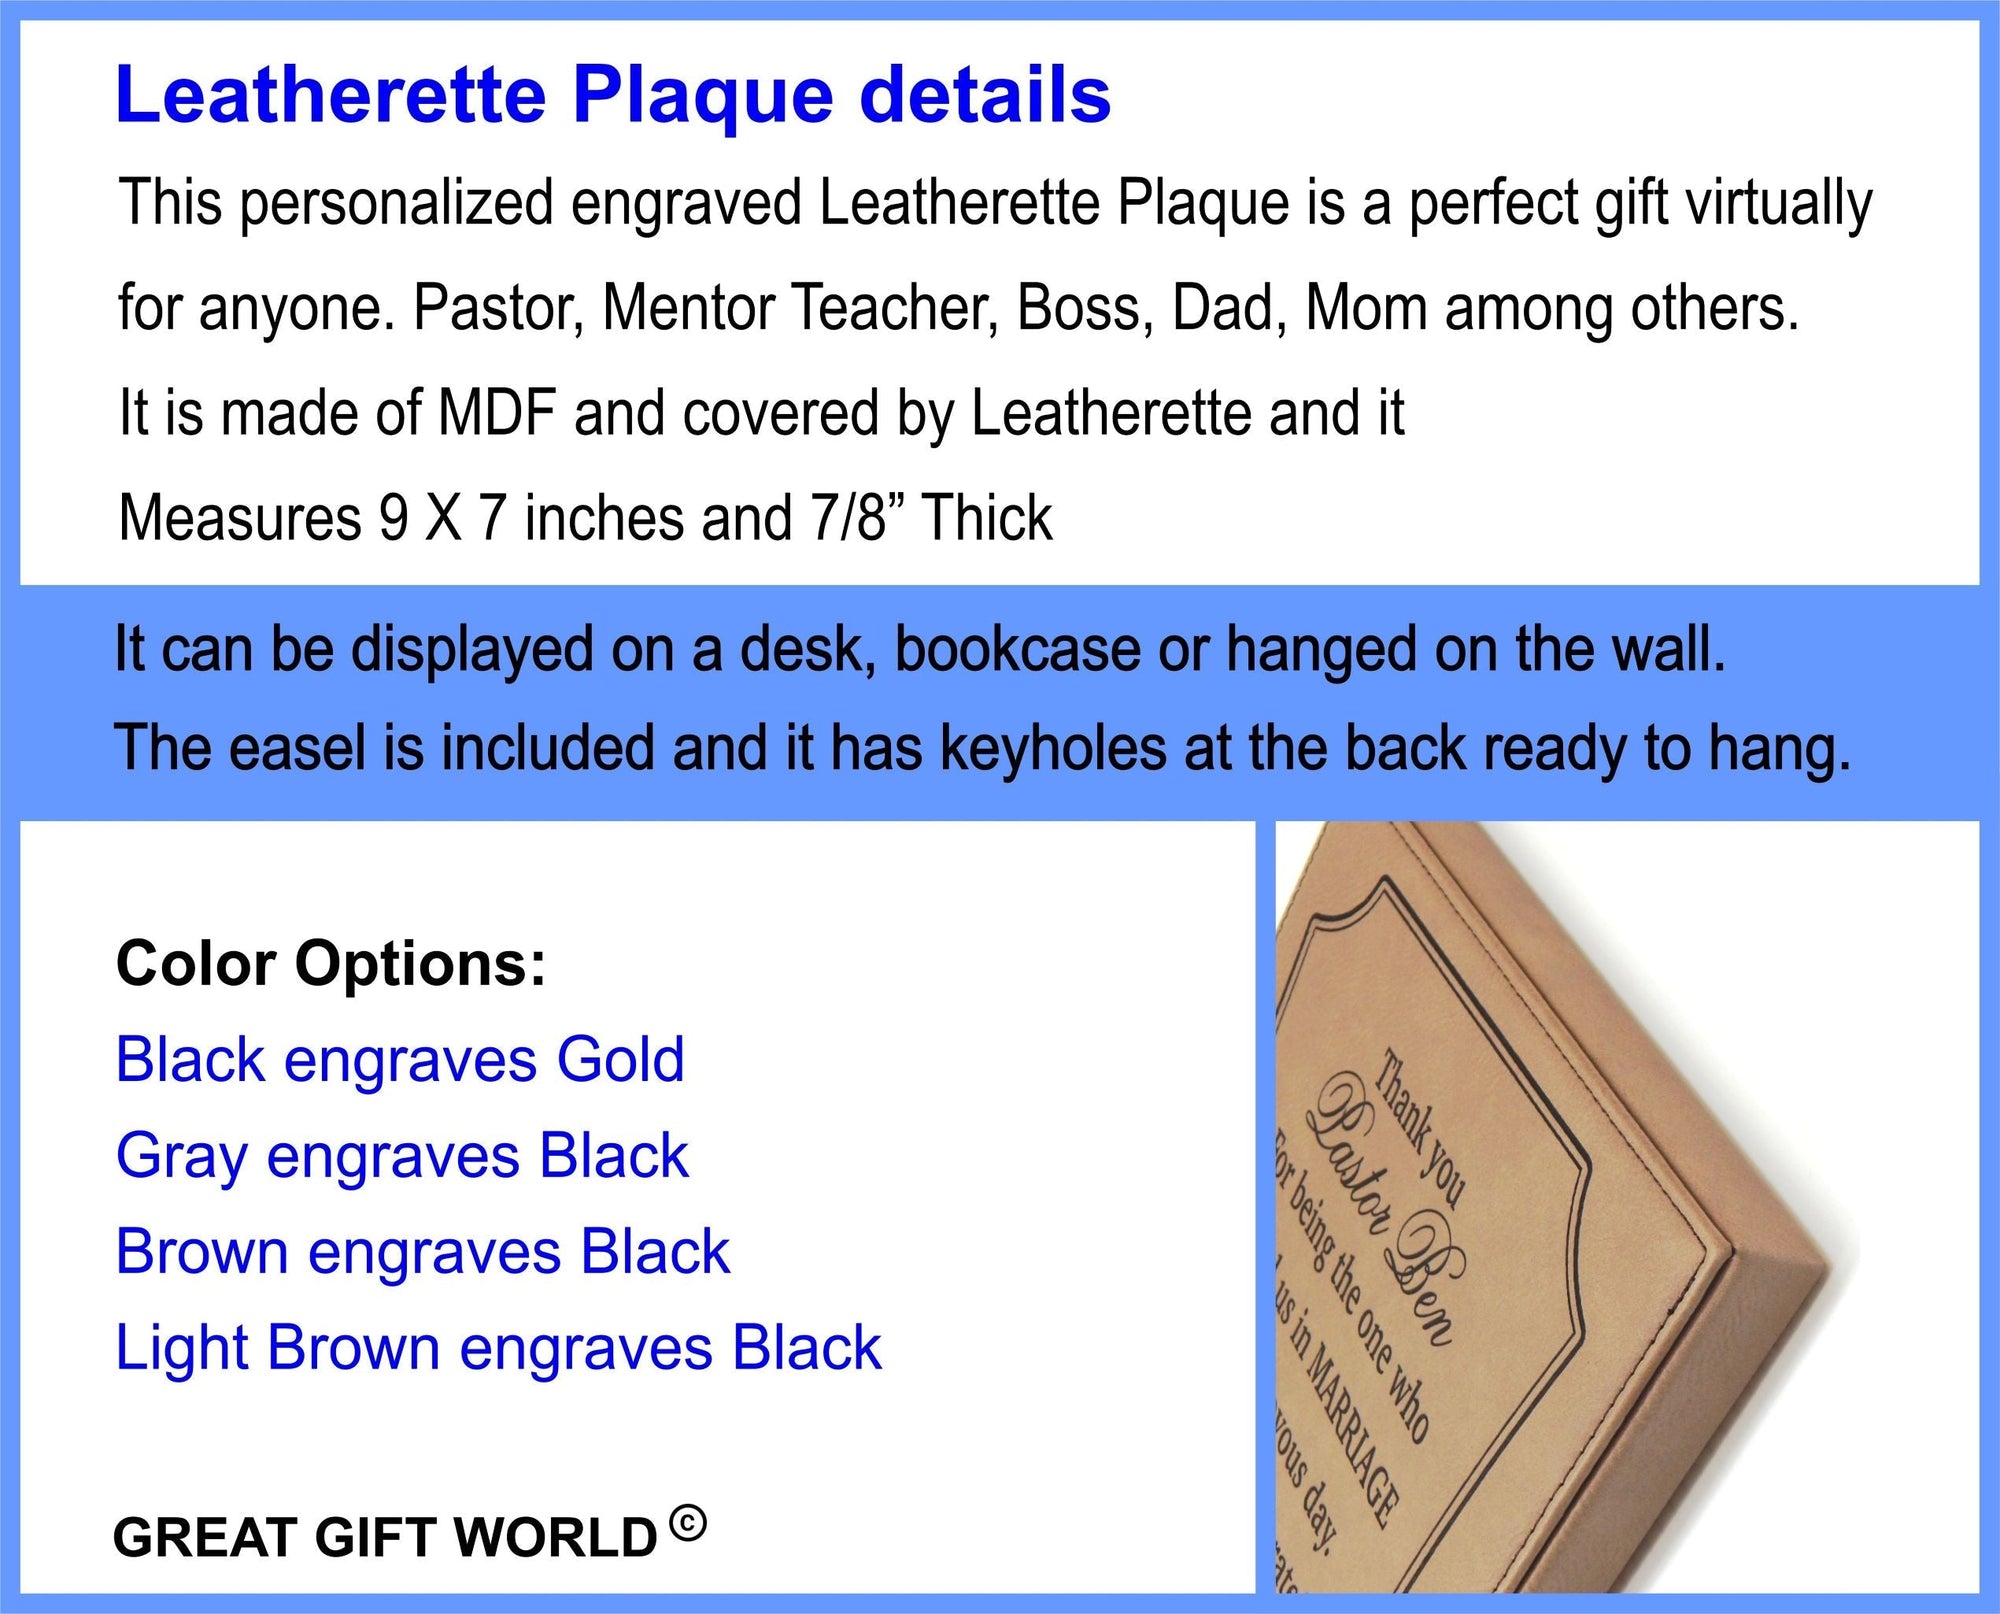 Personalized Gift for Boss | Great Mentor Teacher | Engraved Leatherette Plaque